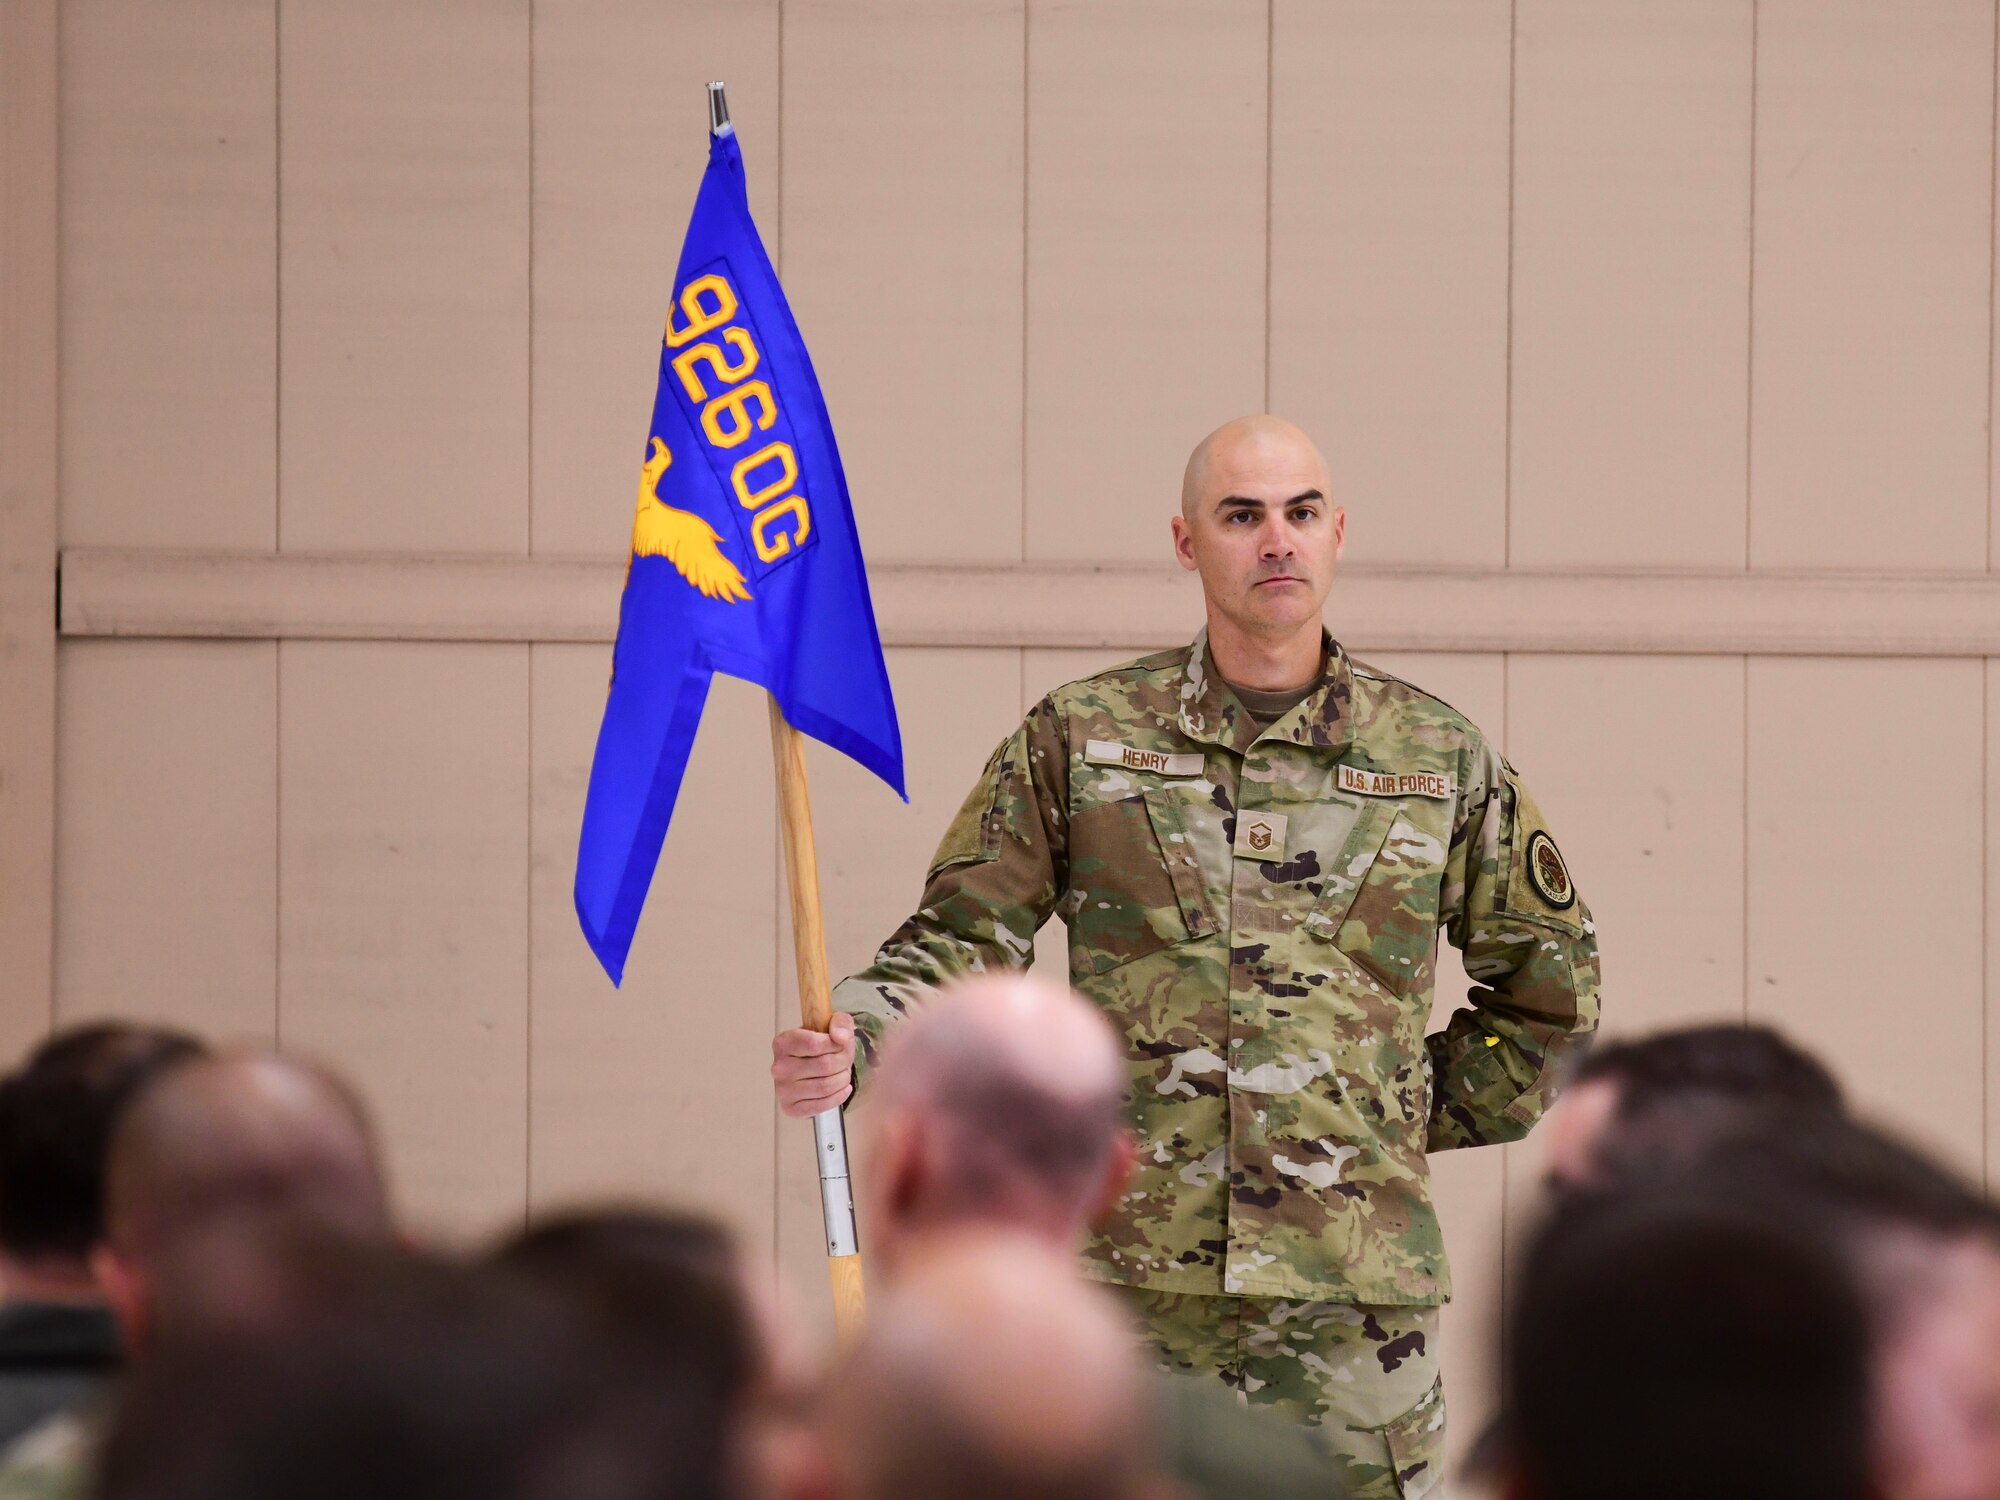 Master Sgt. Jacob Henry stand in front of the crowd while holding the guidon. The guidon has a blue flag that reads "926 OG" in gold letters.